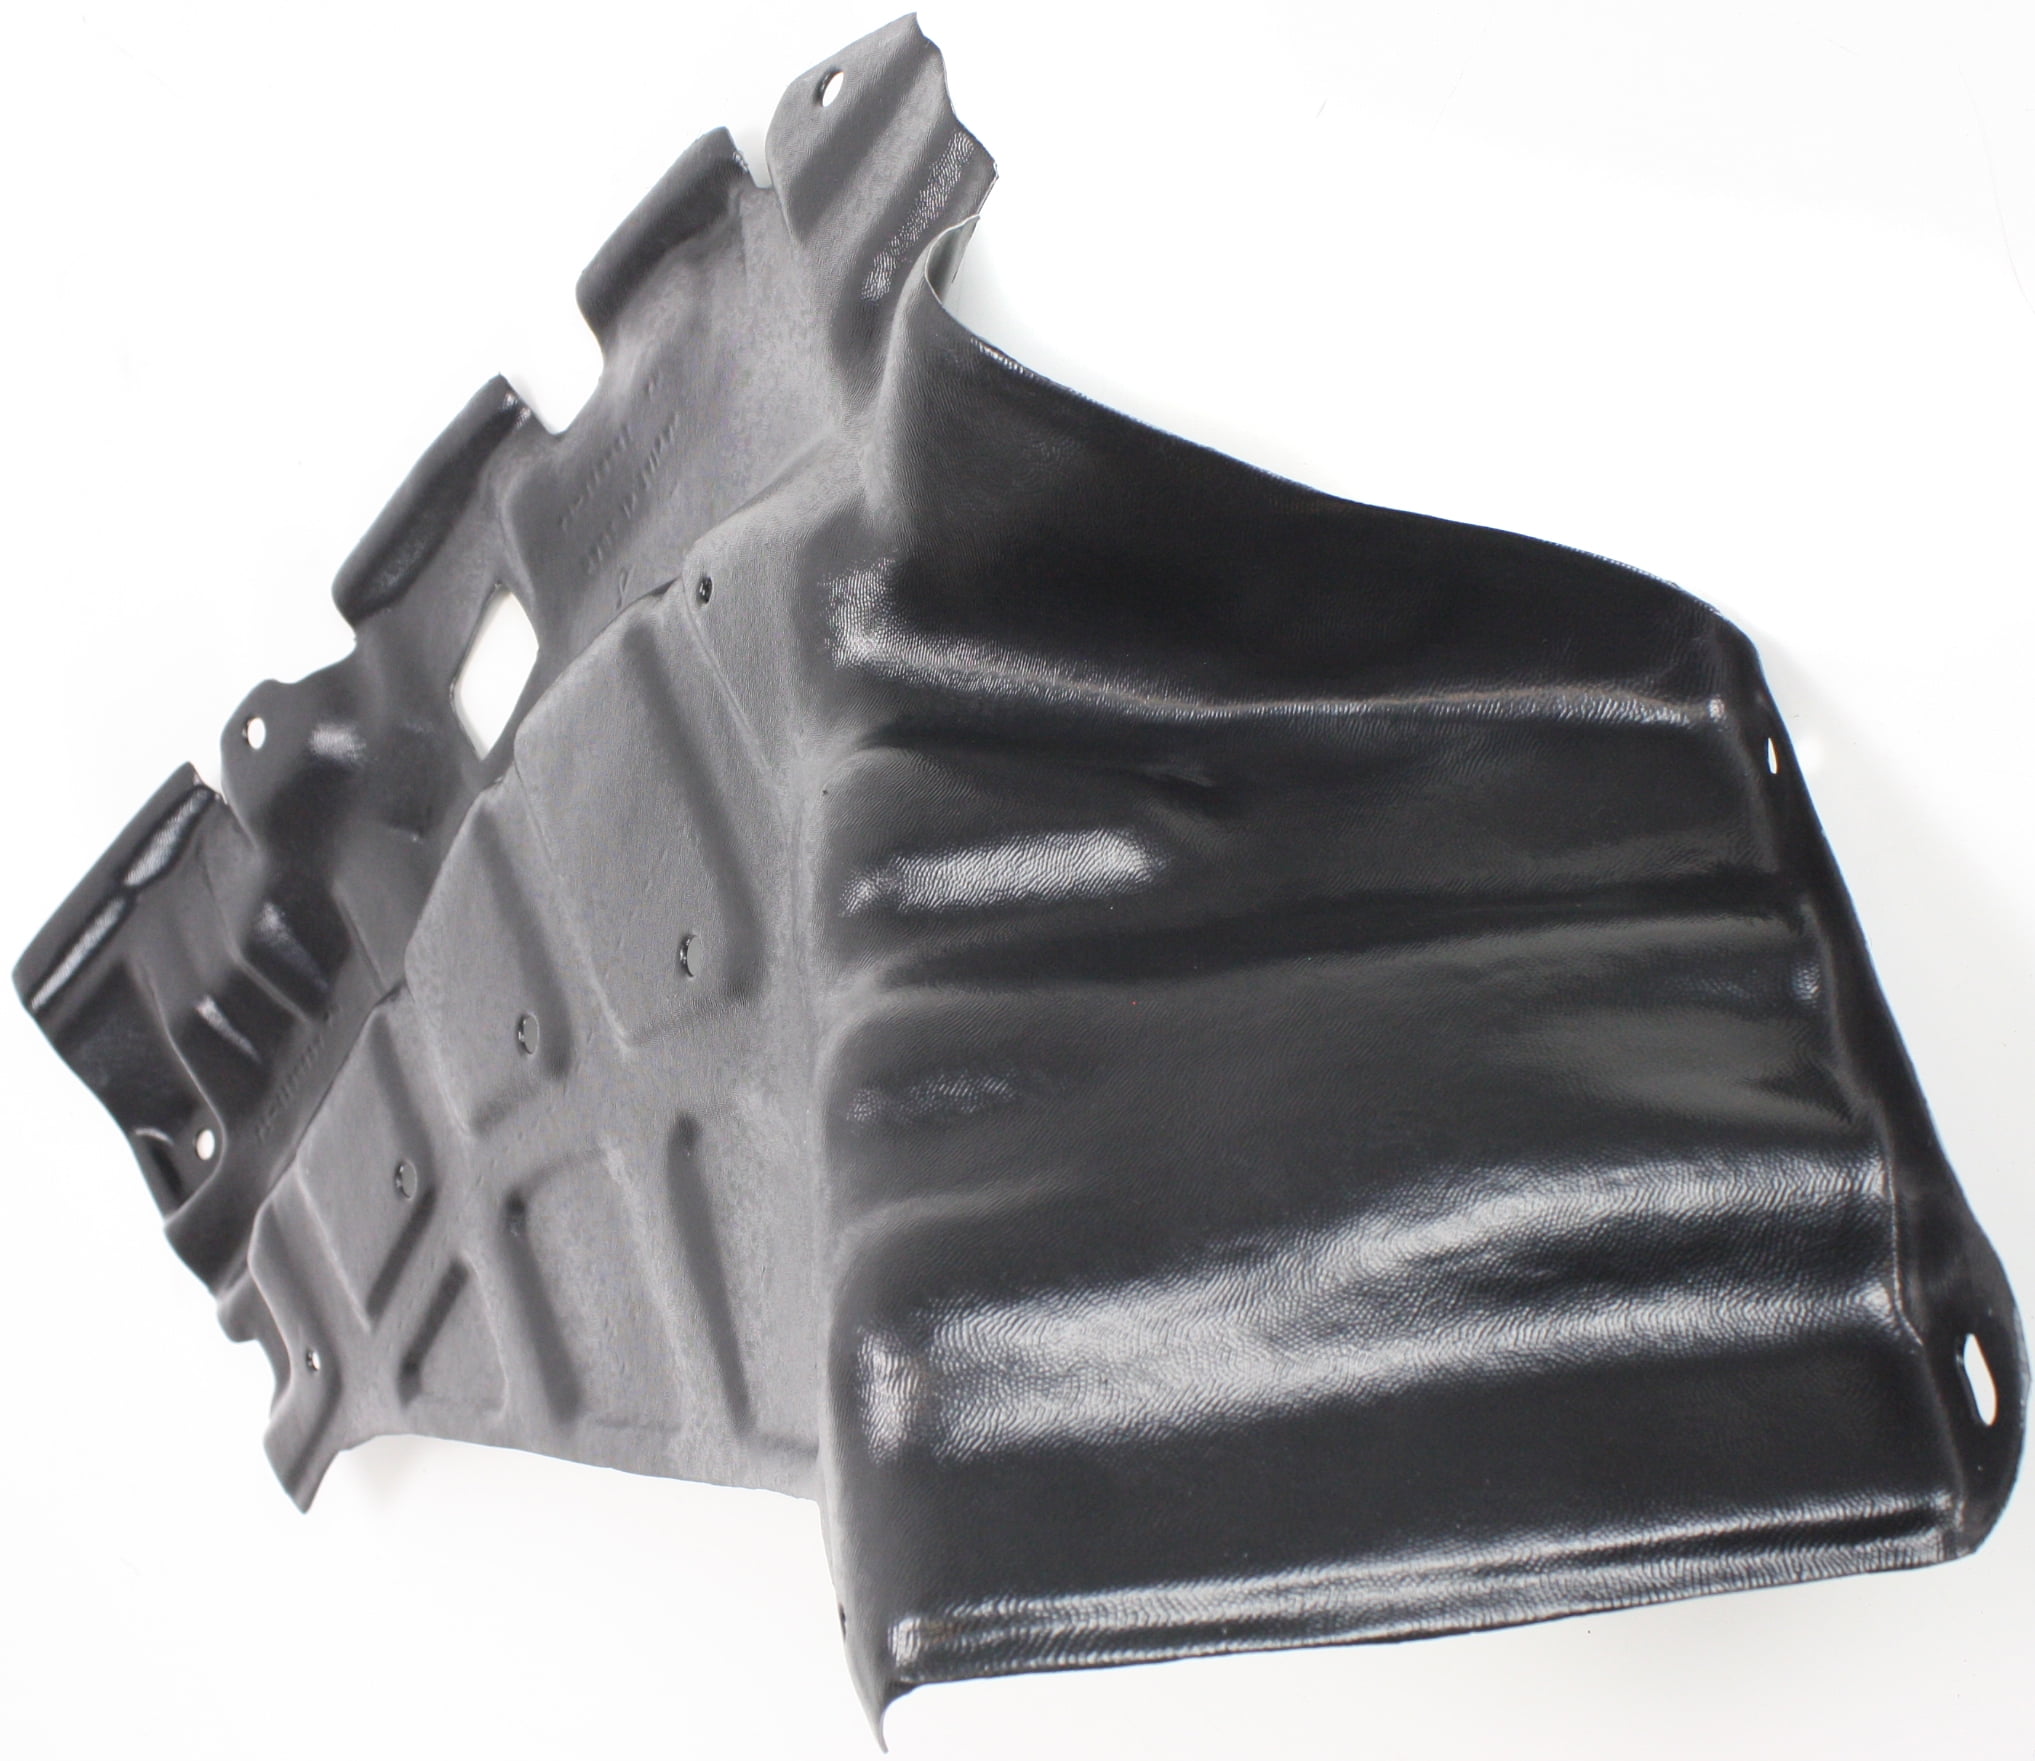 2012-2018 Ford Focus Undercar Shield; With 2.0L Engine; Made Of Pet Plastic Partslink FO1228121C 